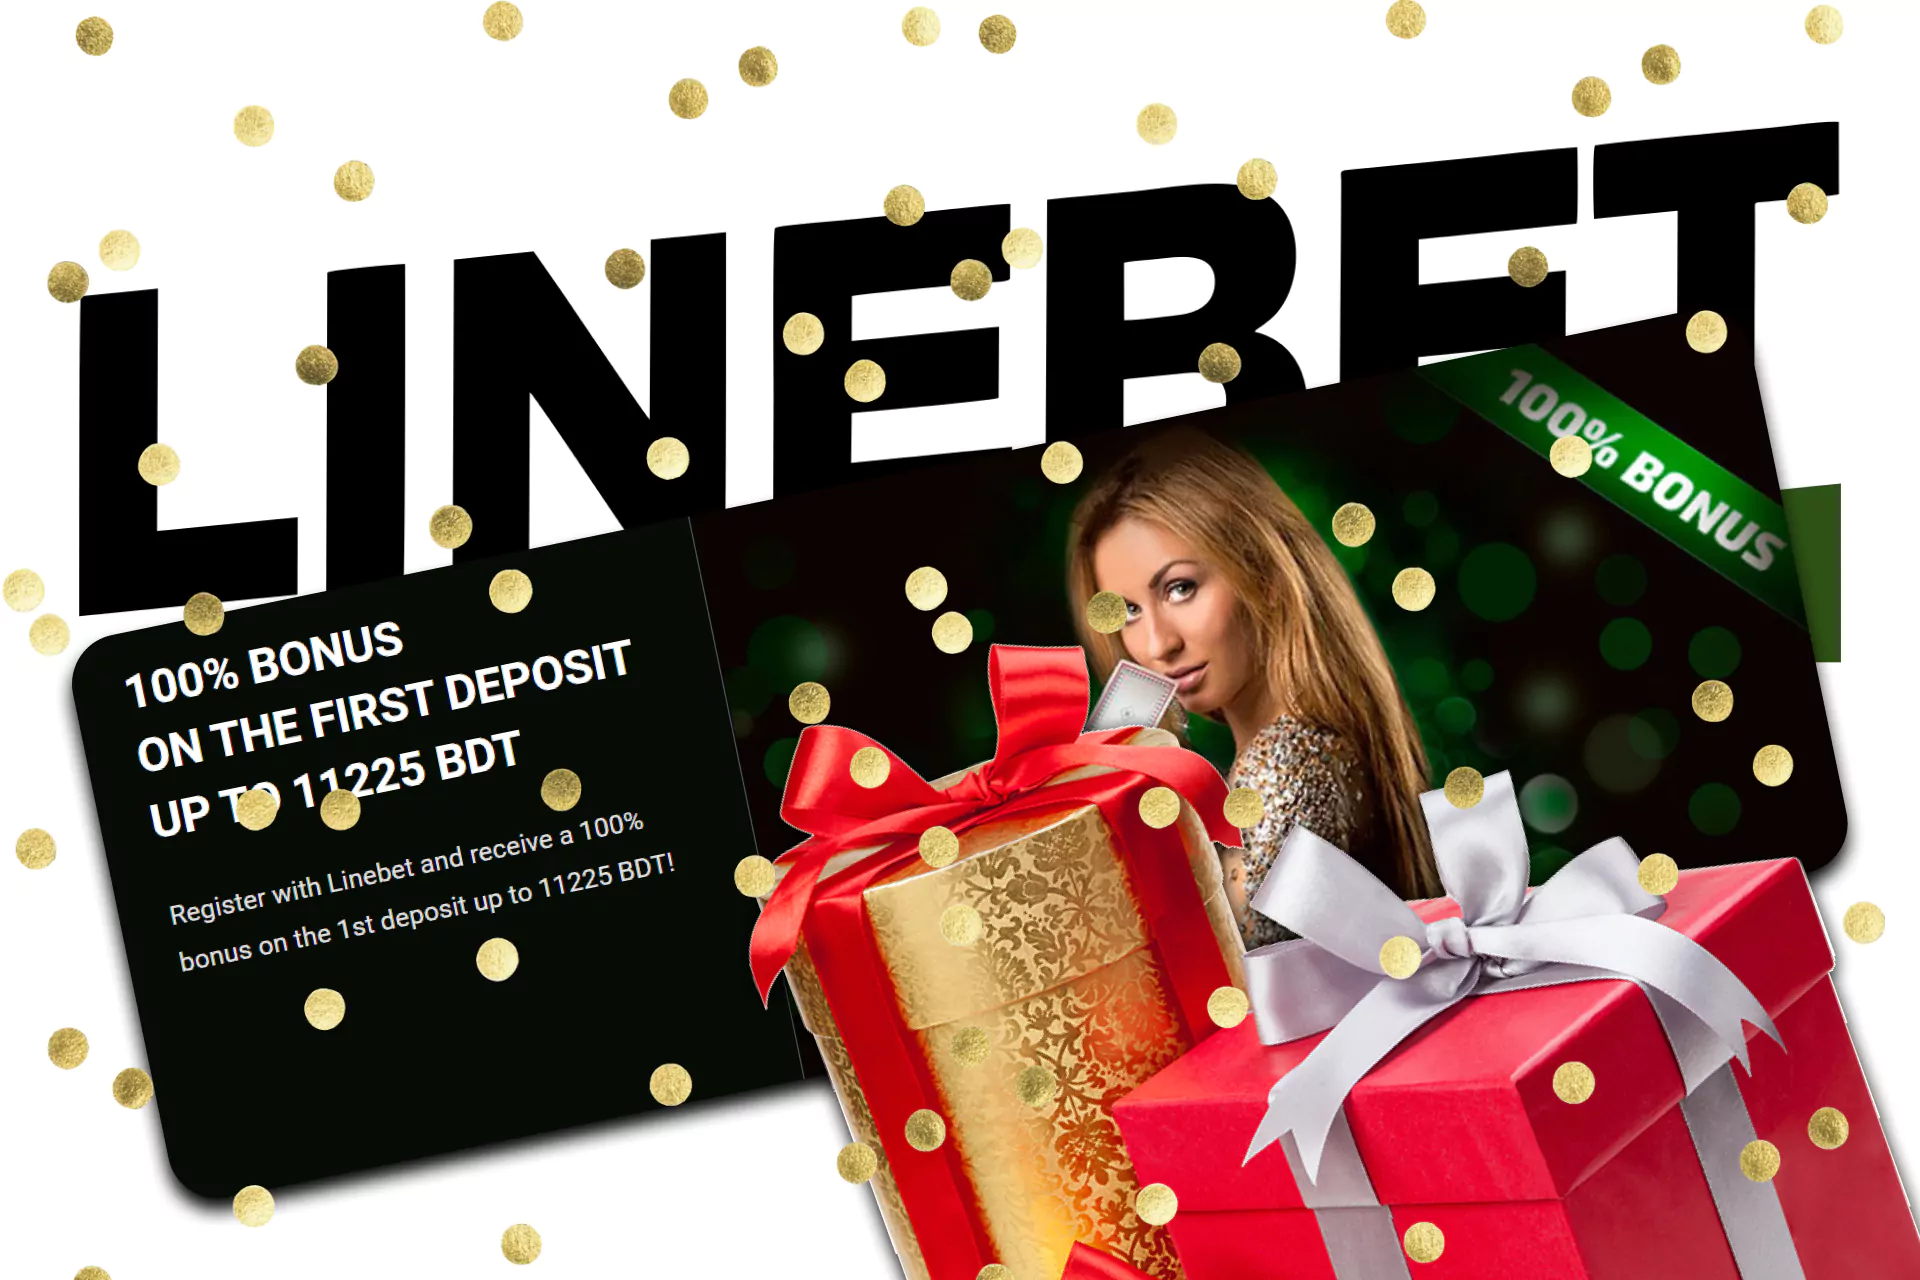 Replenish your account and get a bonus from Linebet for betting on Dota2.